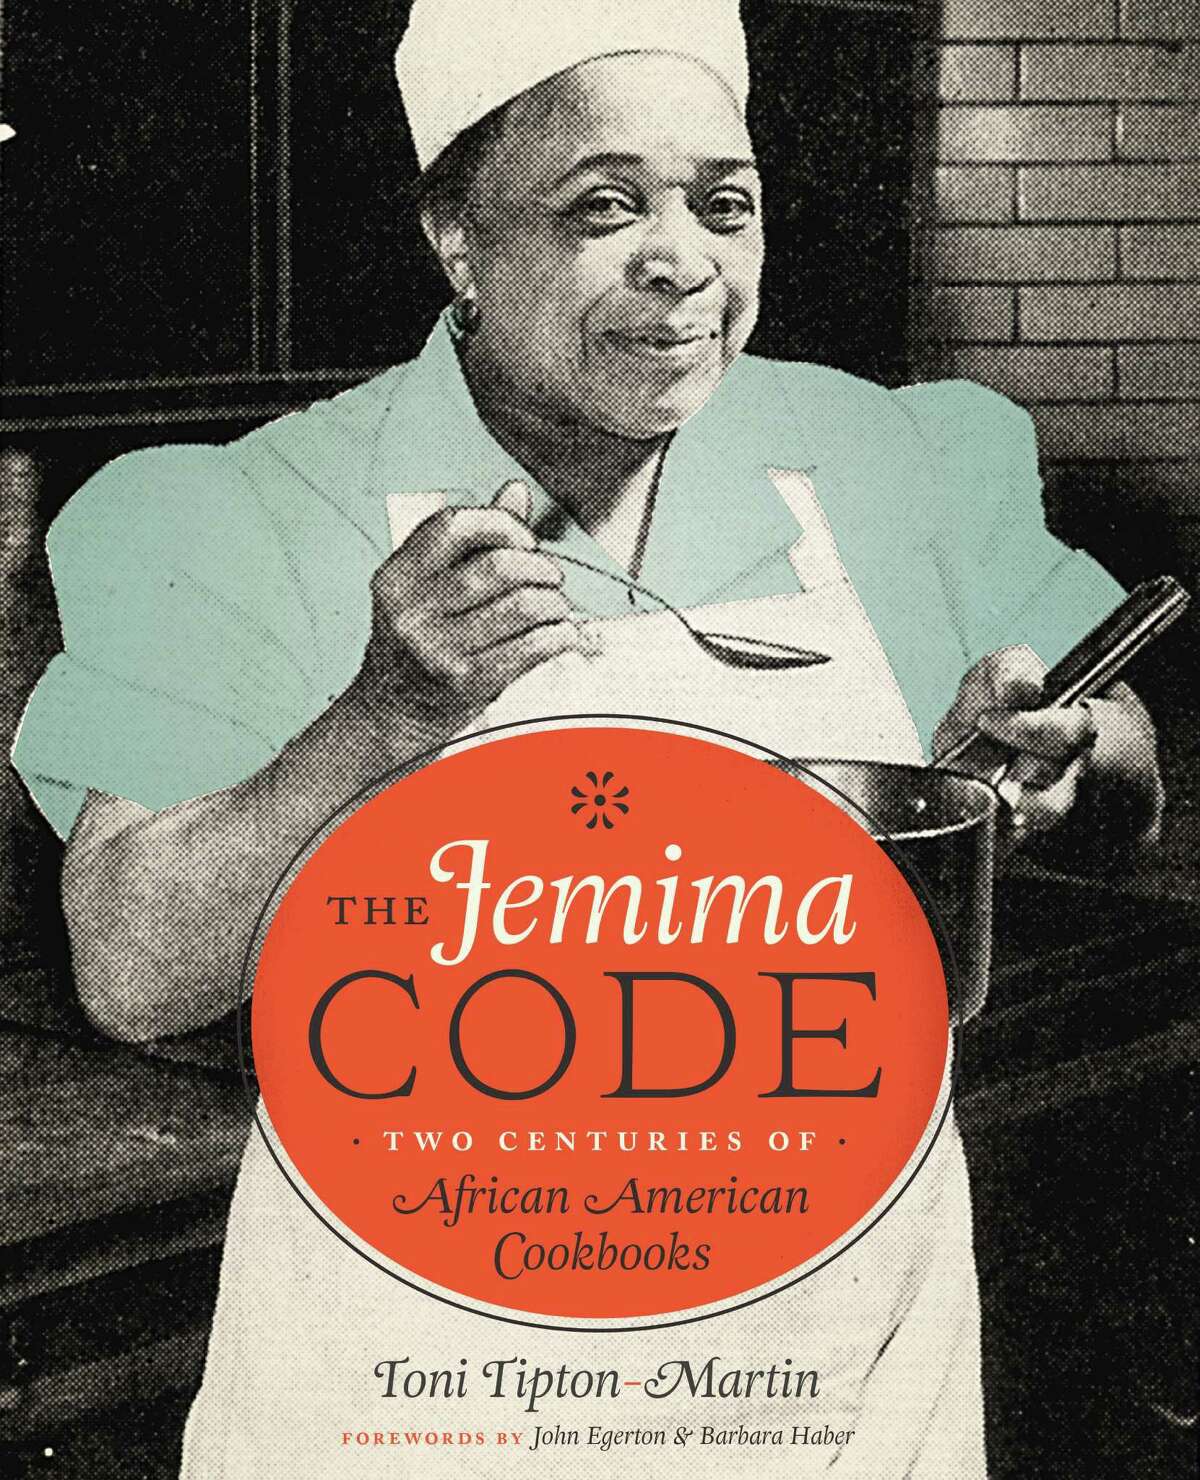 Cover: "The Jemima Code: Two Centuries of African American Cookbooks" by Toni Tipton-Martin (University of Texas Press, $45).